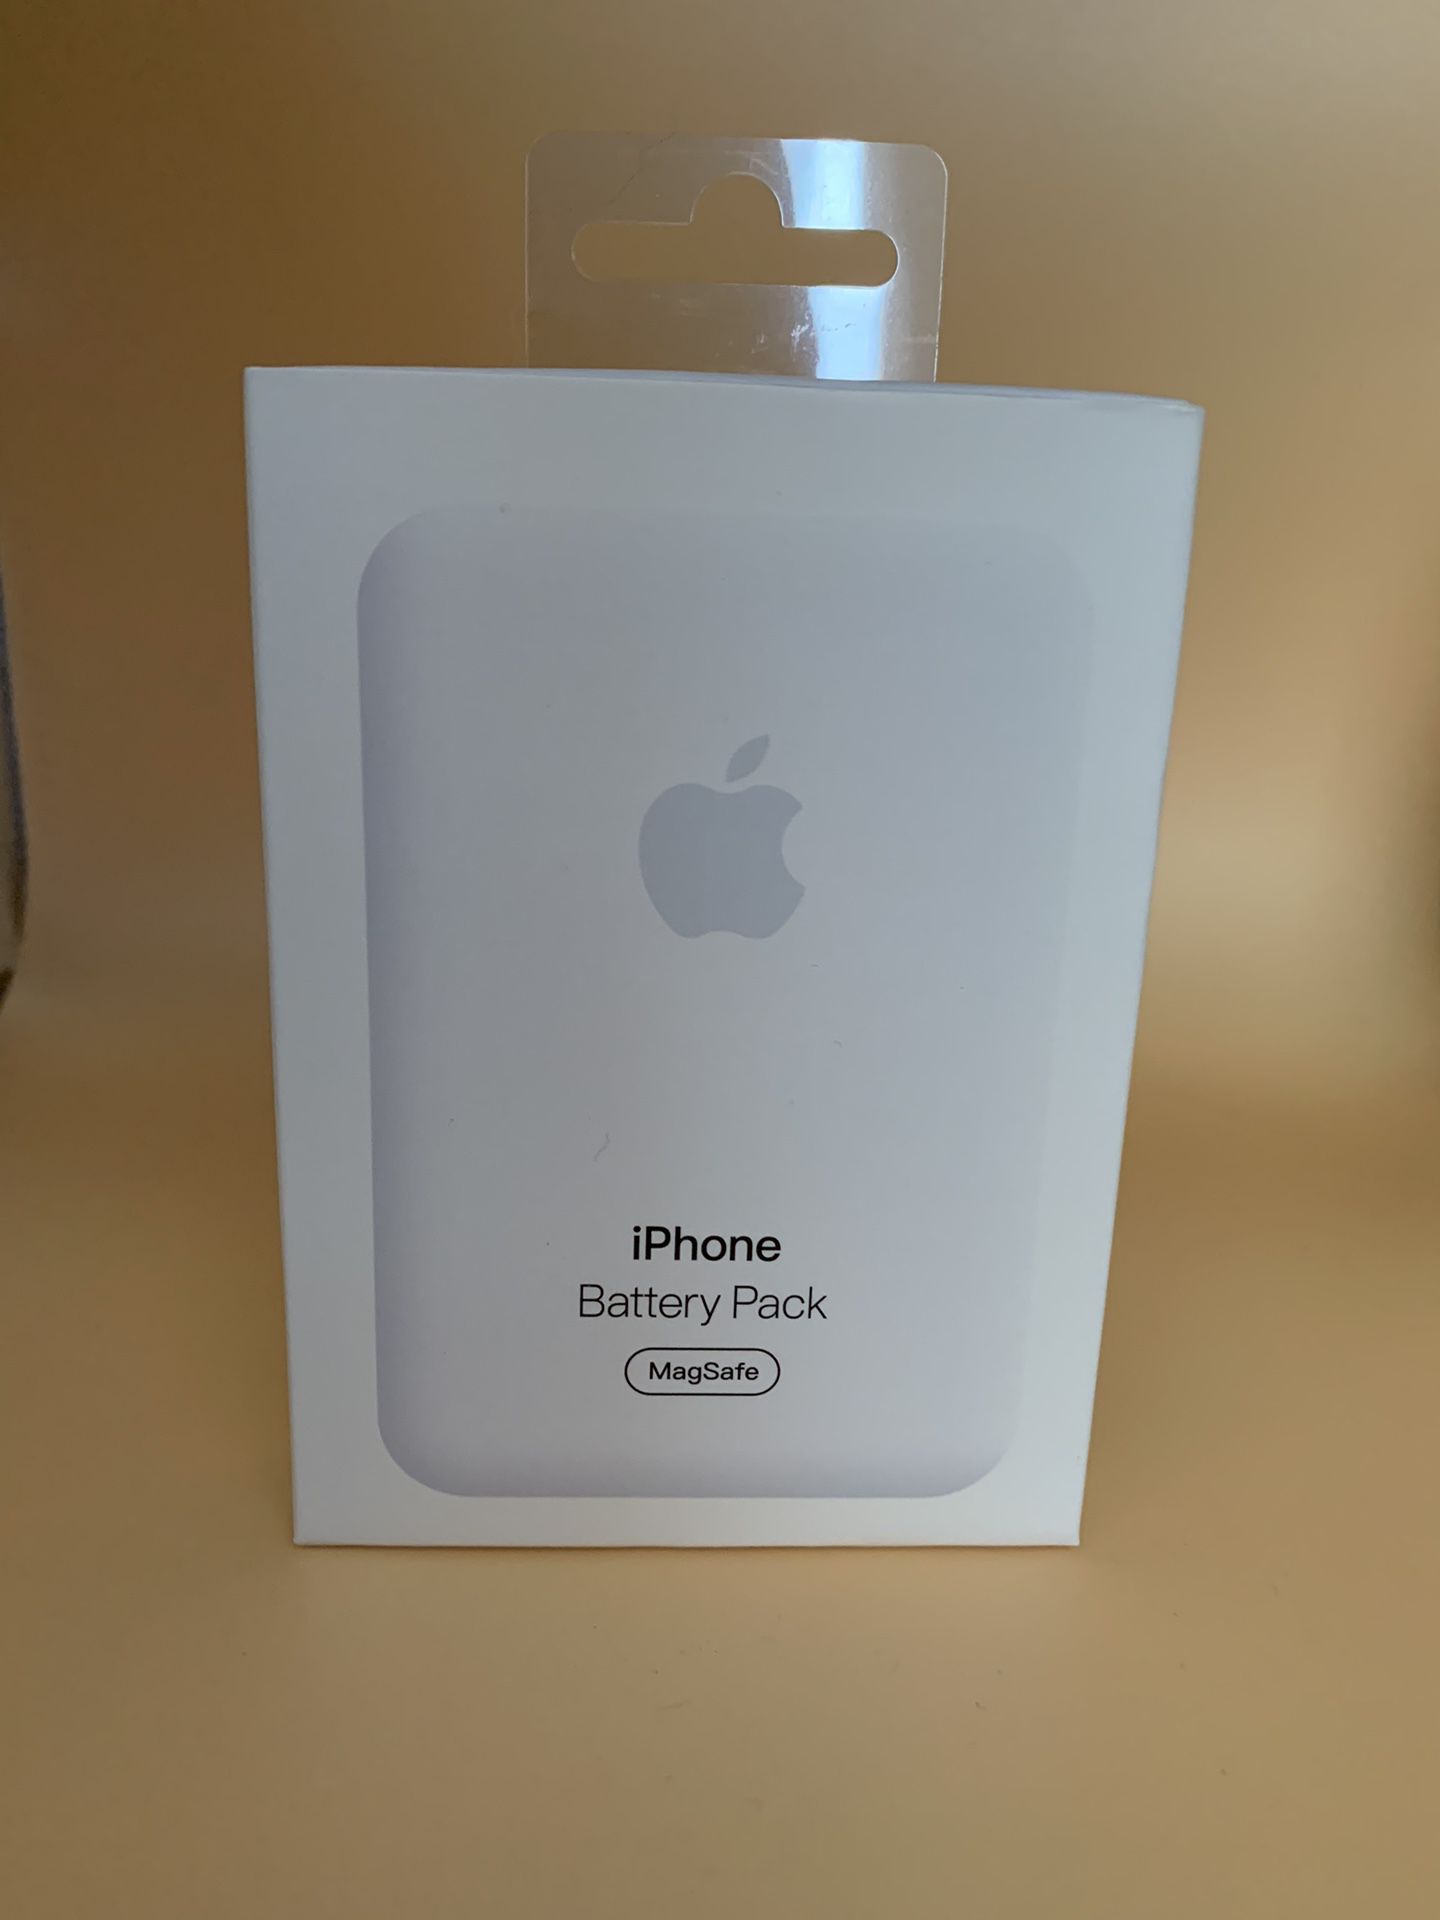 Apple iPhone Battery Pack